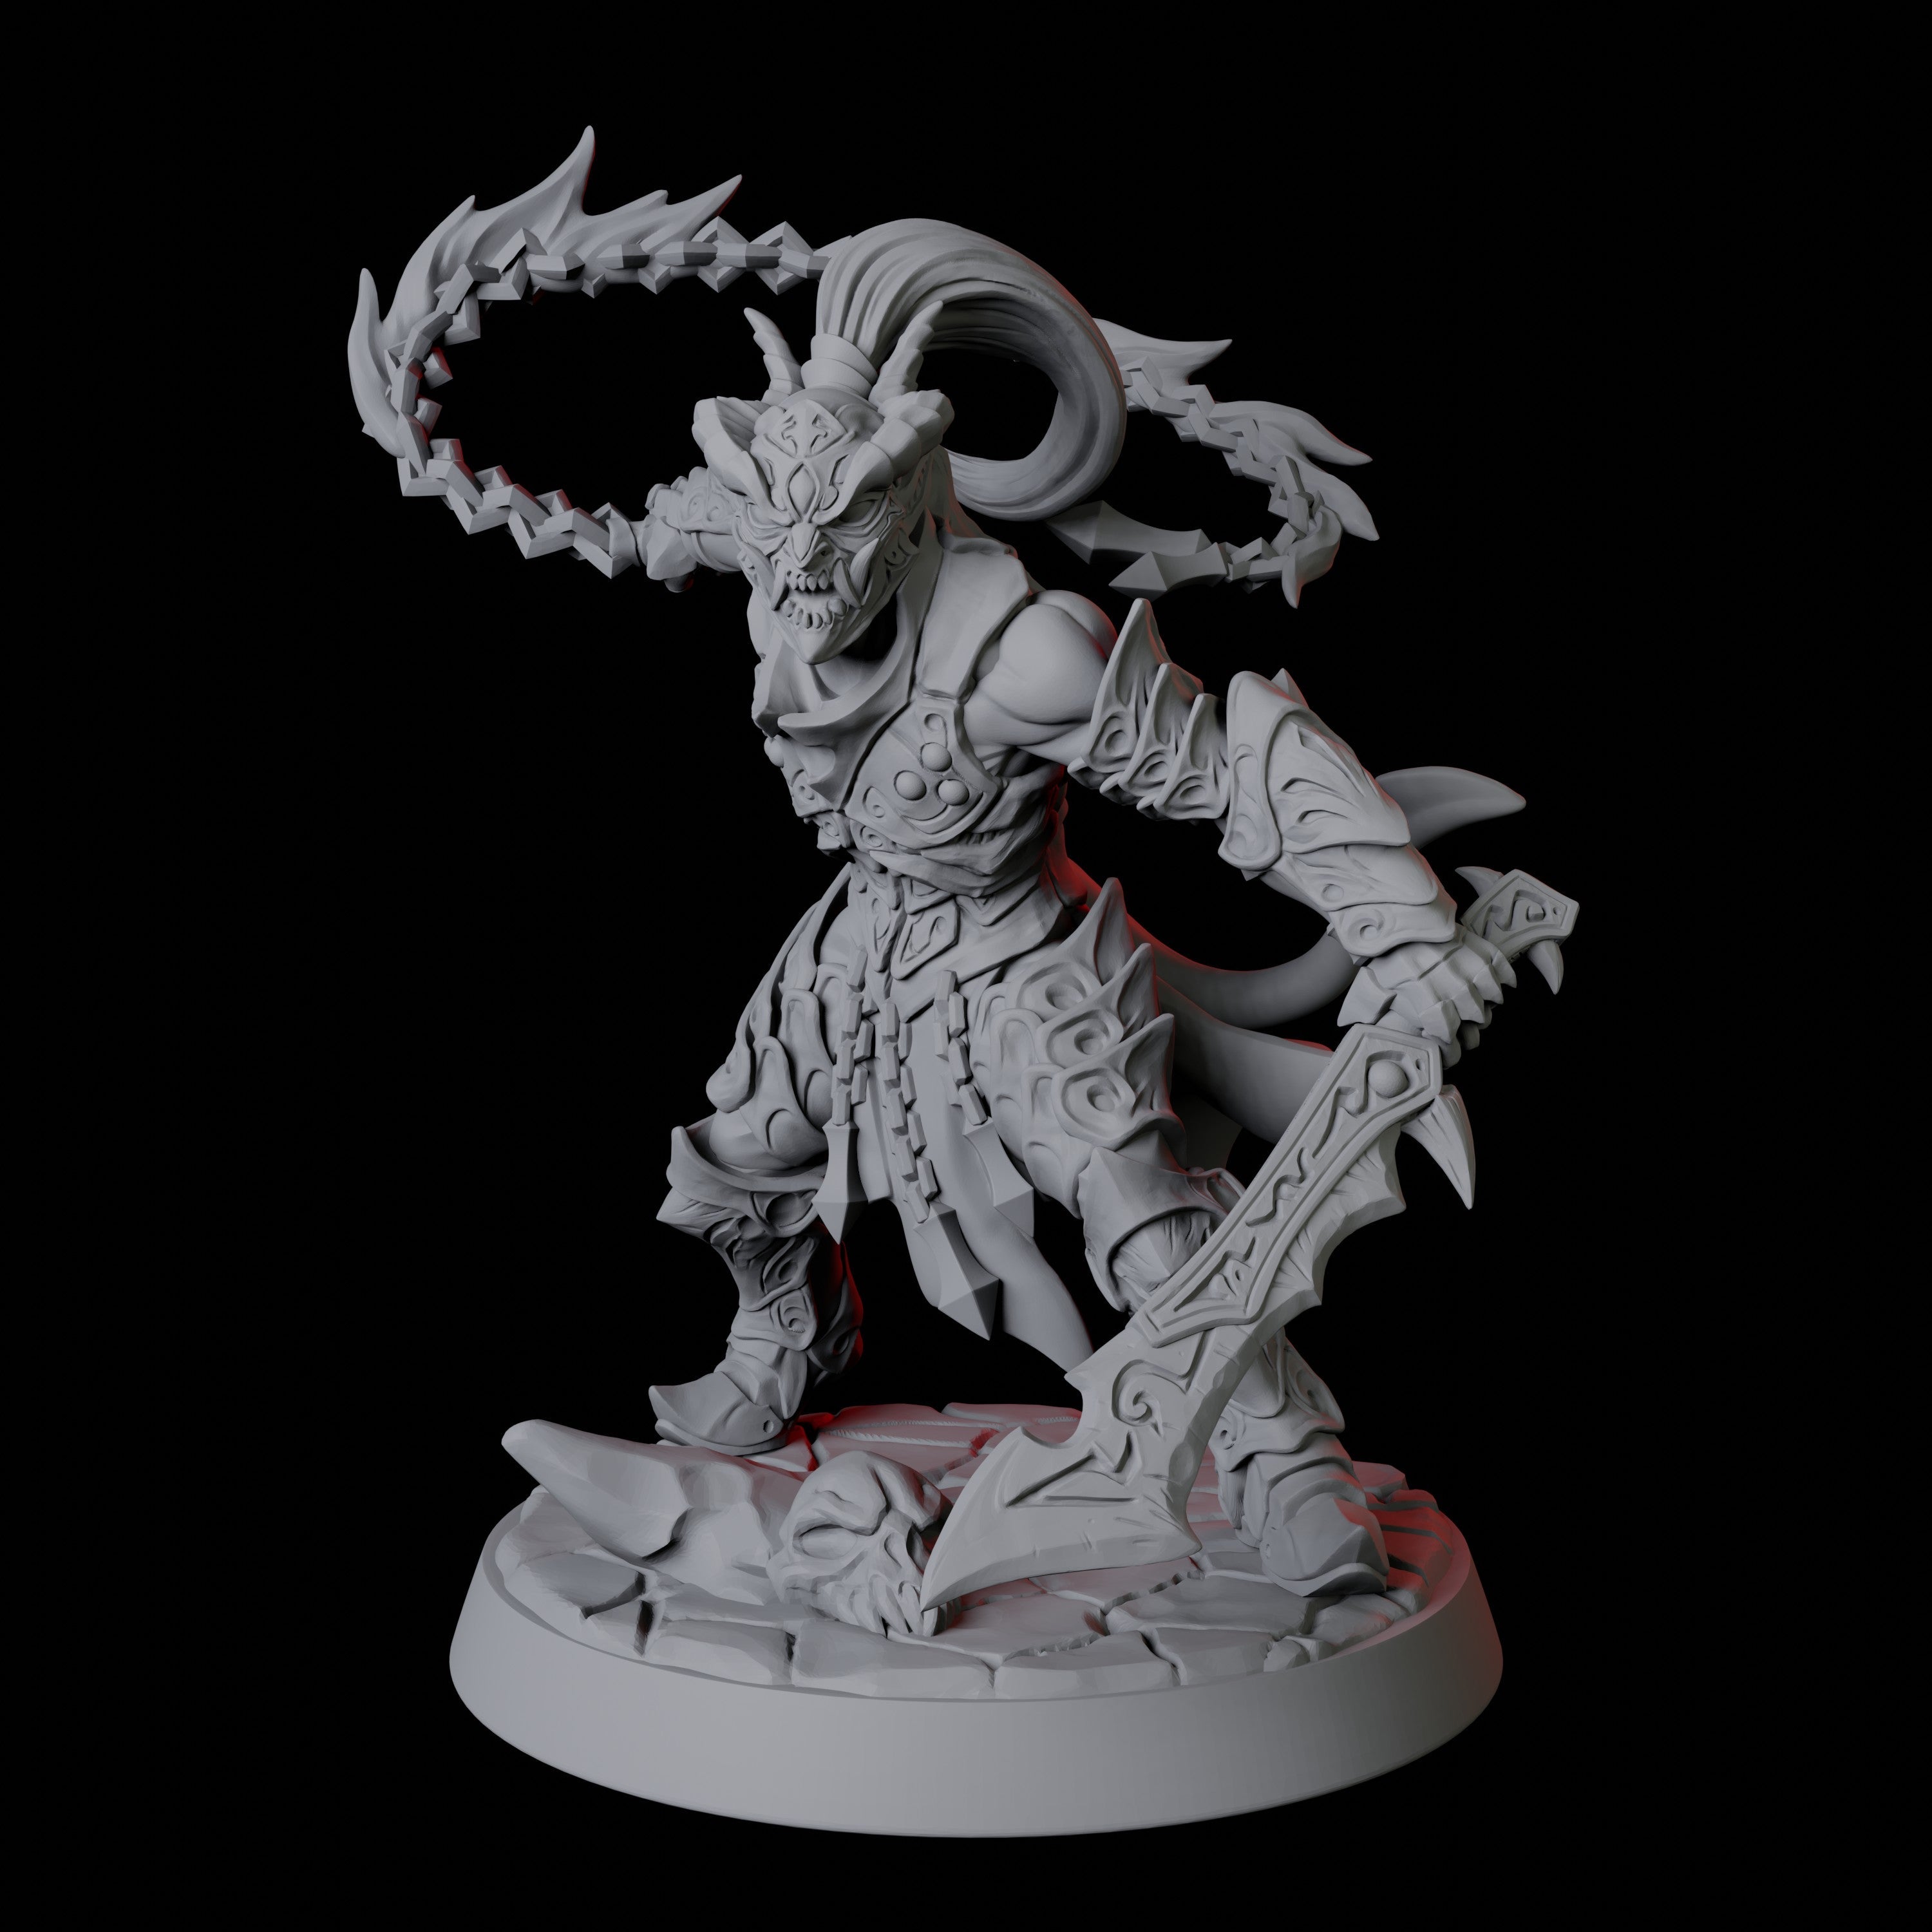 Six Devil Soldiers Miniature for Dungeons and Dragons